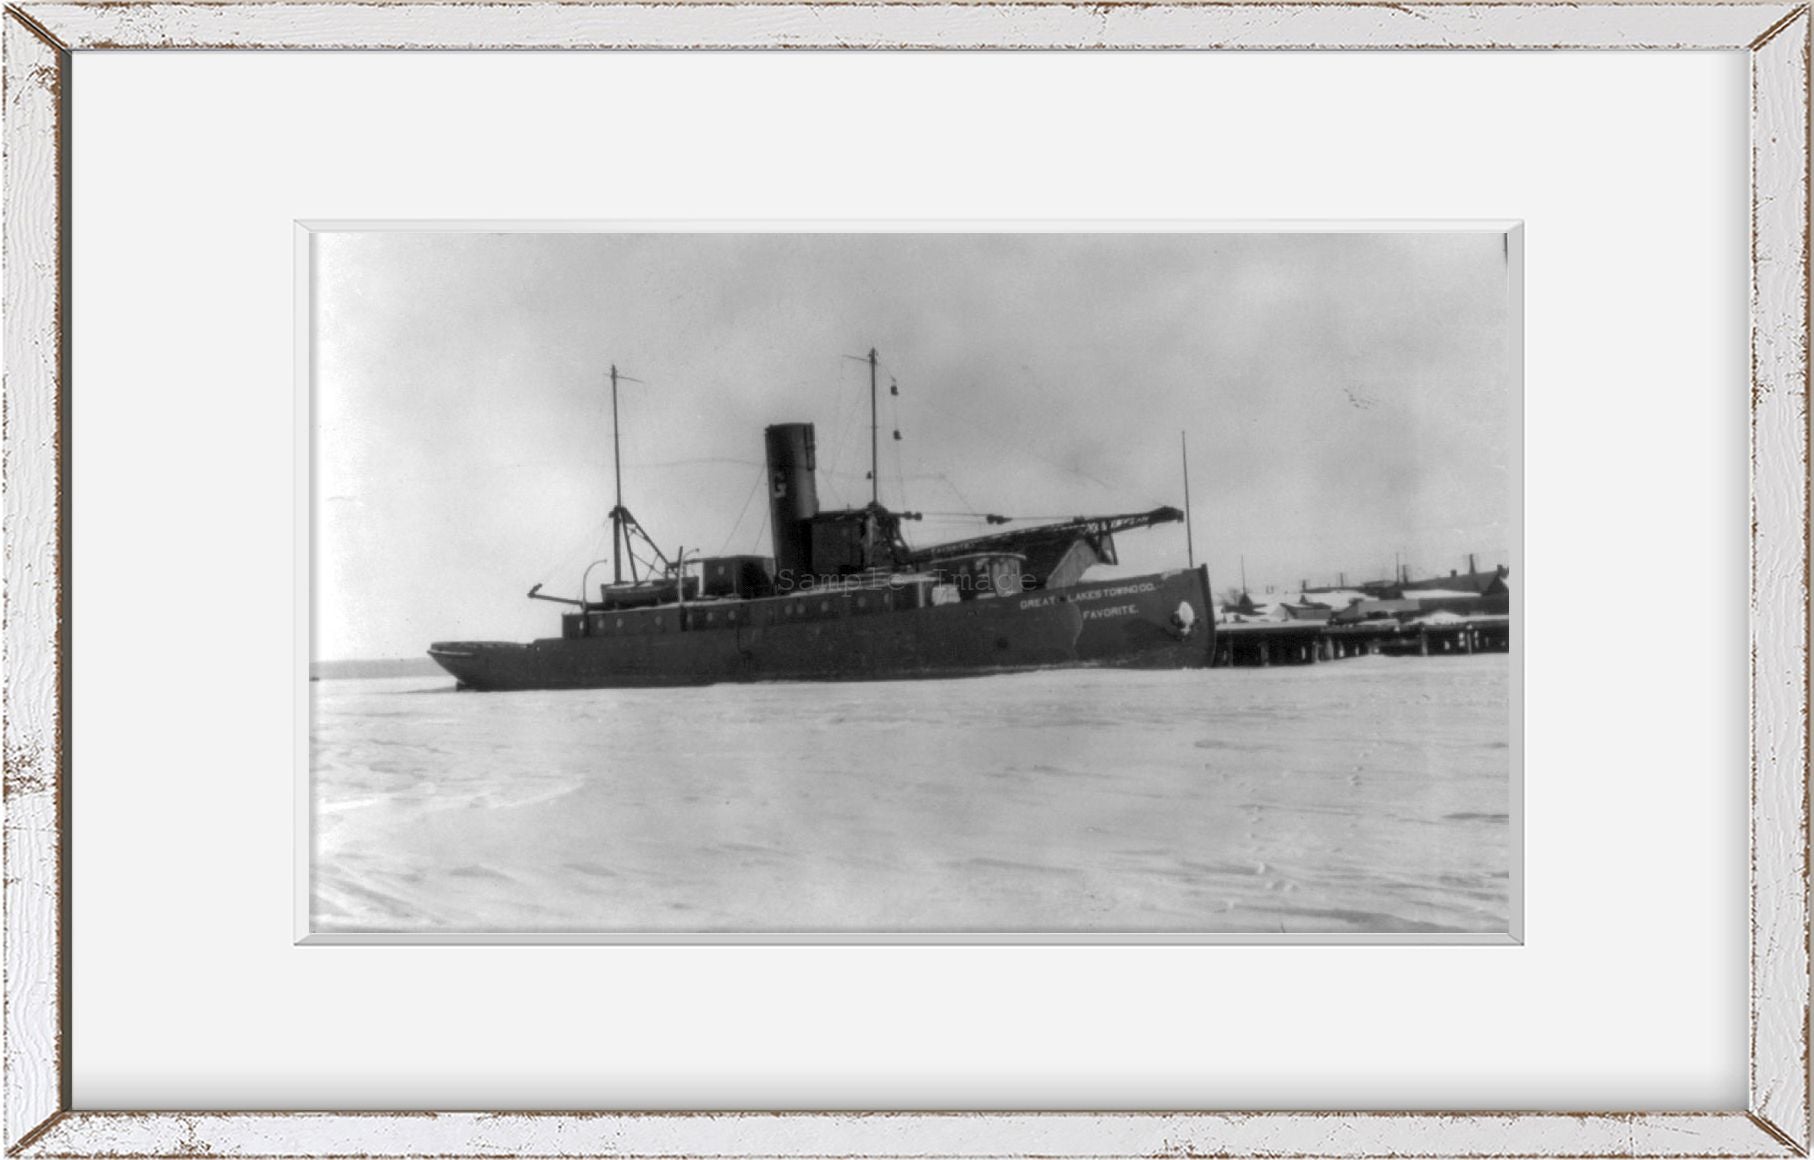 Photograph of Wrecking tug, FAVORITE, St. Ignace, Mich.